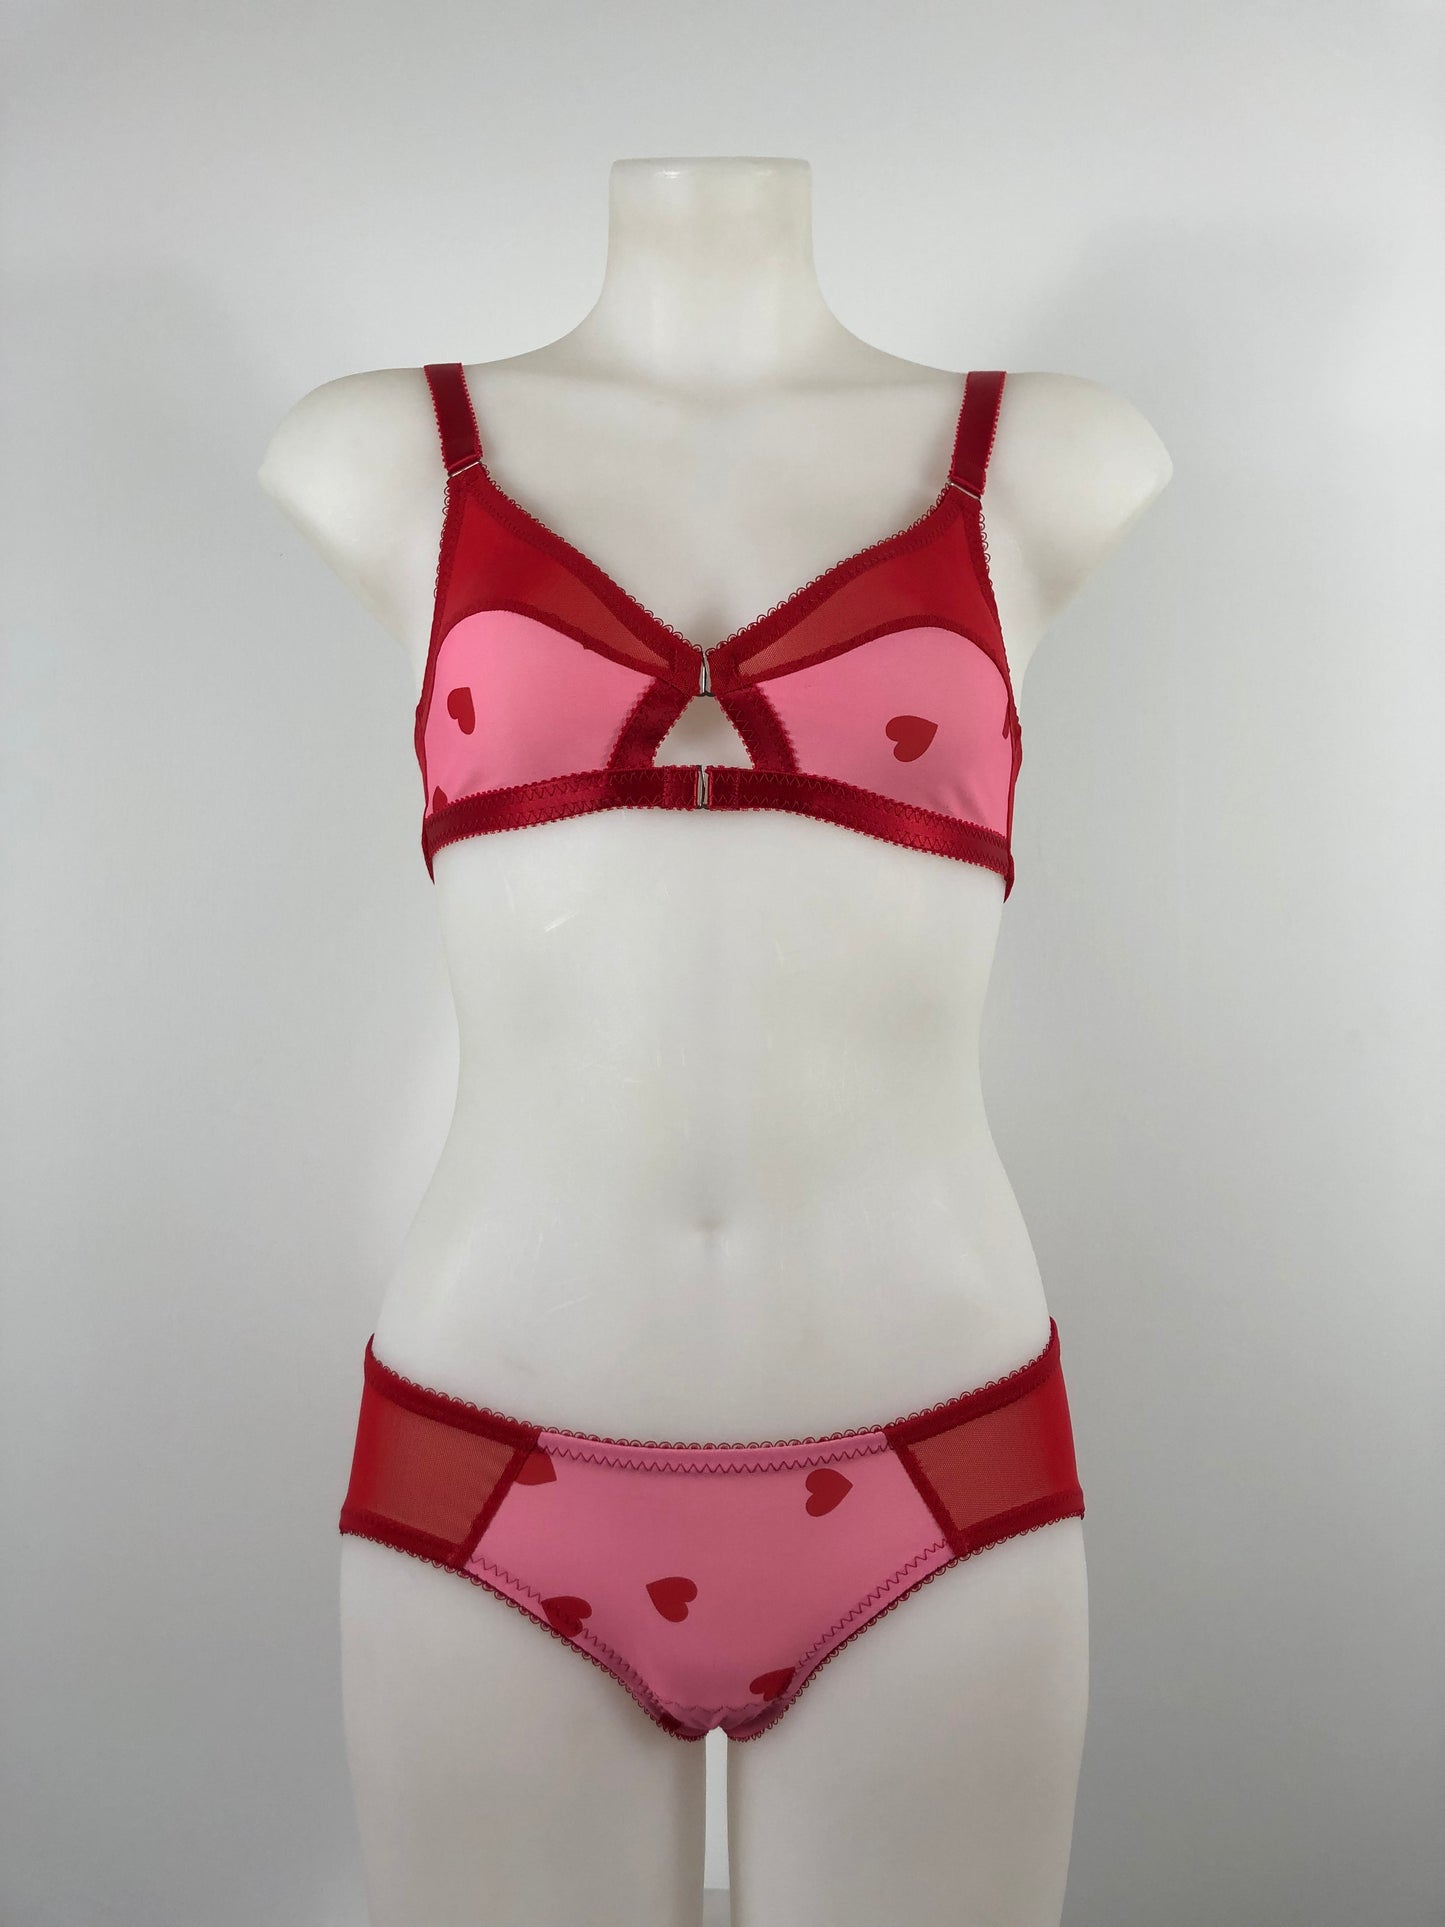 red and pink heart lingerie. vintage inspired classic cut panties knickers with pink heart front and red mesh sides, perfect for valentines cheesecake pin ups,  A fun, bold, playful retro inspired underwear set